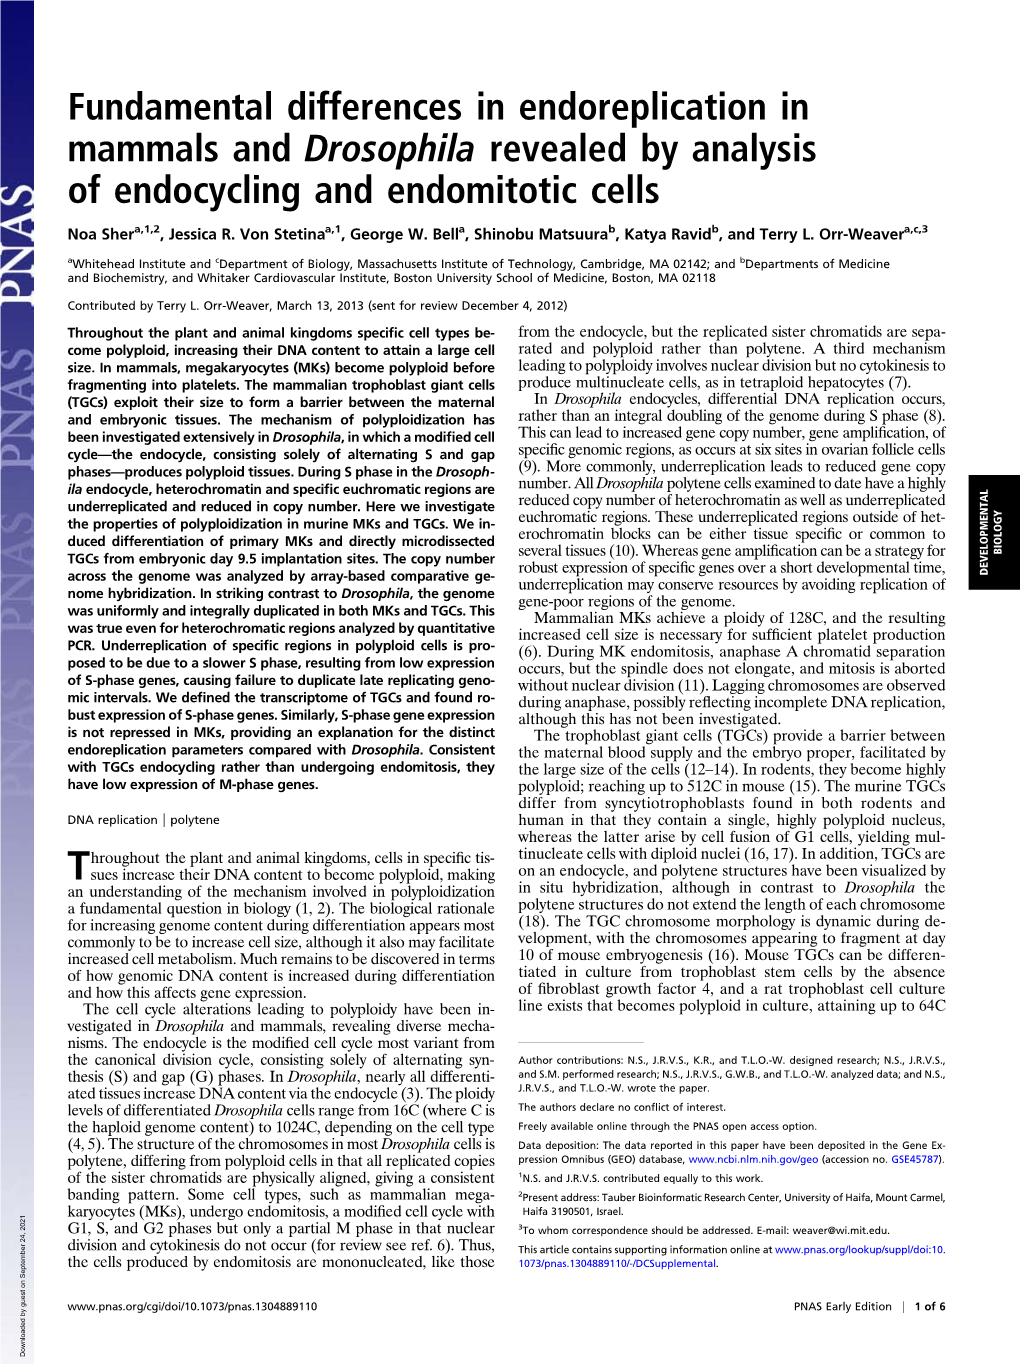 Fundamental Differences in Endoreplication in Mammals and Drosophila Revealed by Analysis of Endocycling and Endomitotic Cells